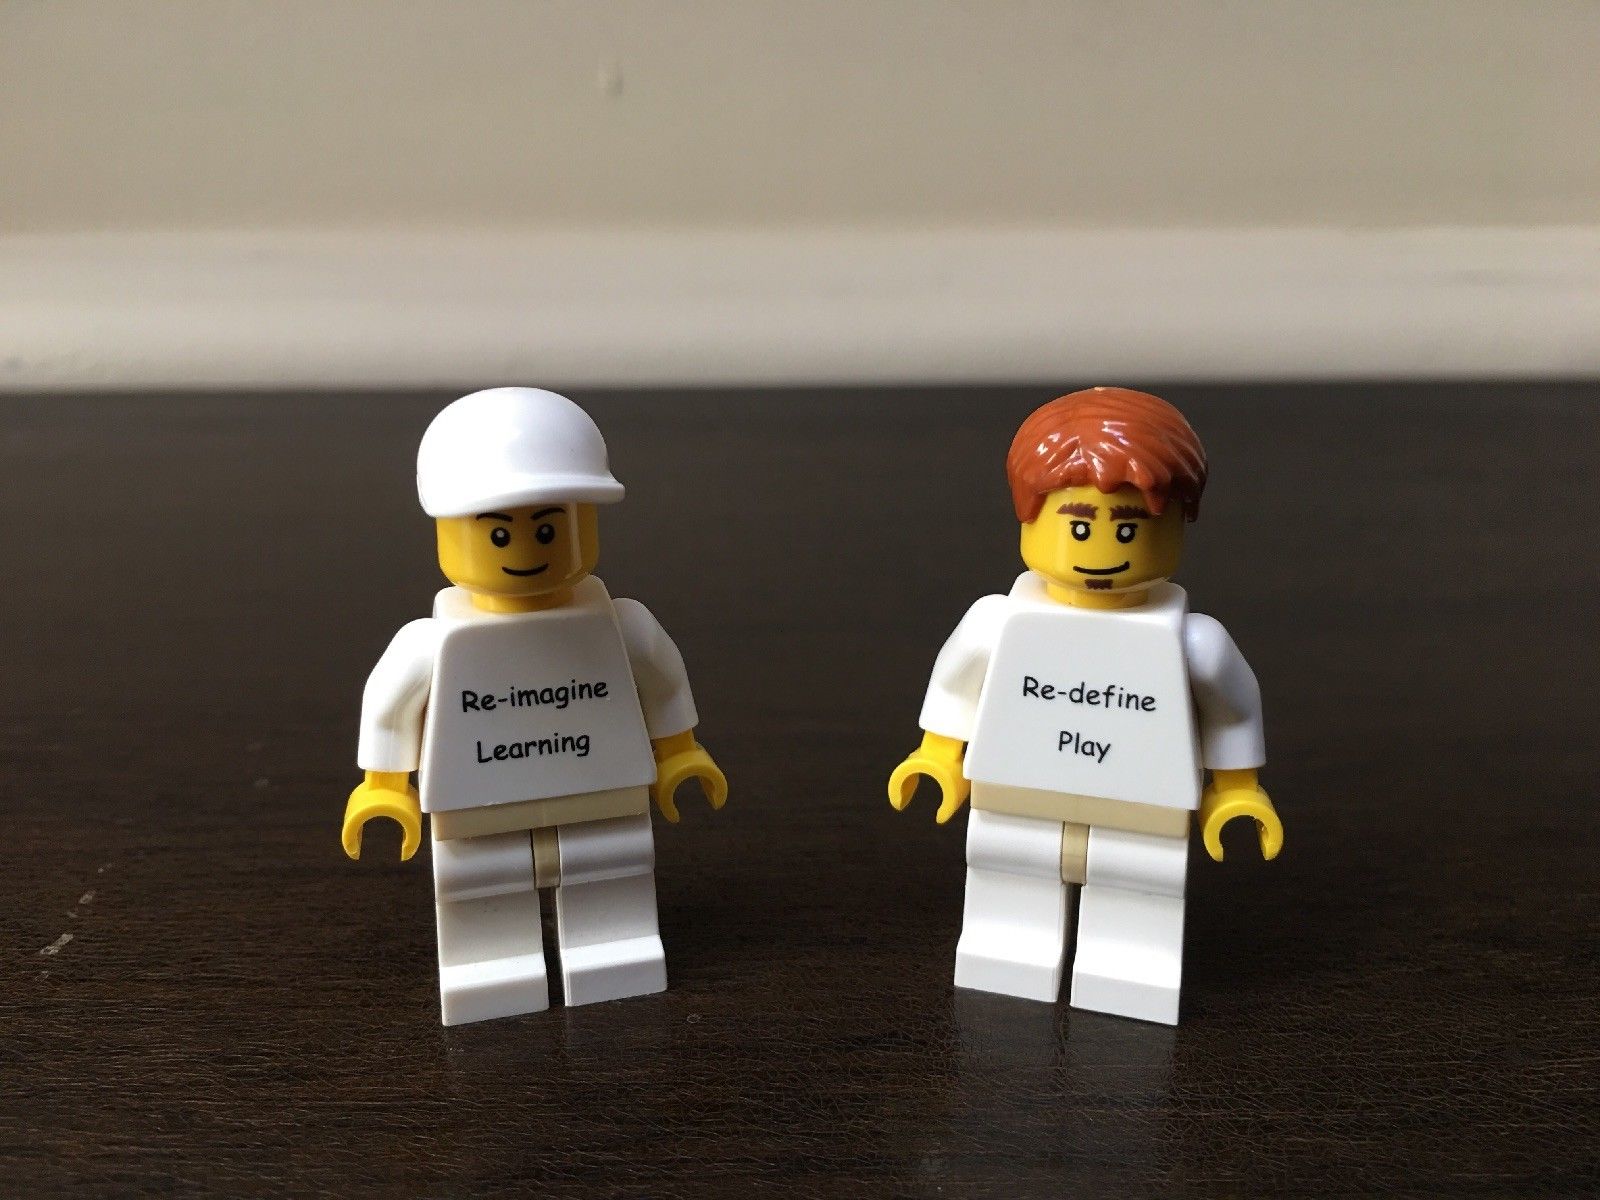 Sanktion Soveværelse af Lego 2014 Idea Conference Exclusive Minifigures - Re-Imagine Learning and  Re-Define Play - Minifigure Price Guide